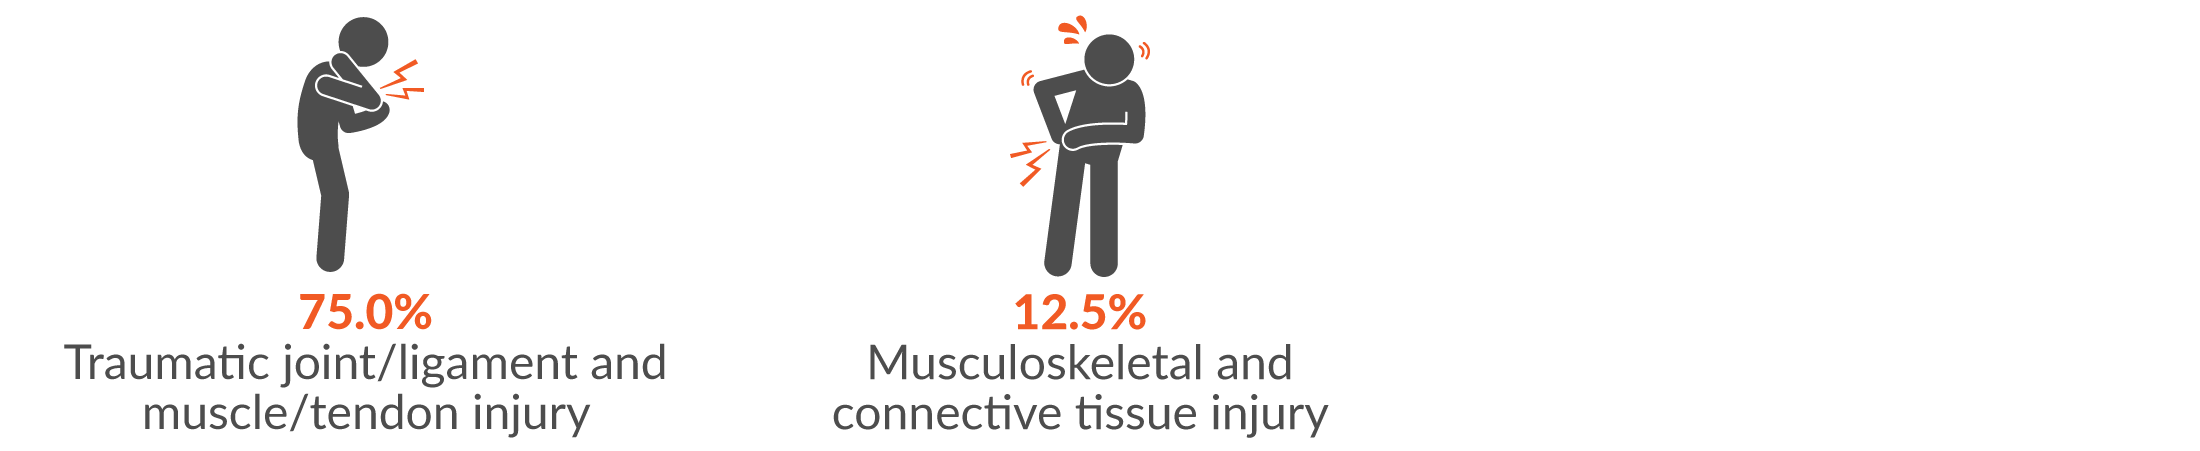 75.0% traumatic joint/ligament and muscle/tendon injury; and 12.5% musculoskeletal and connective tissue injury.